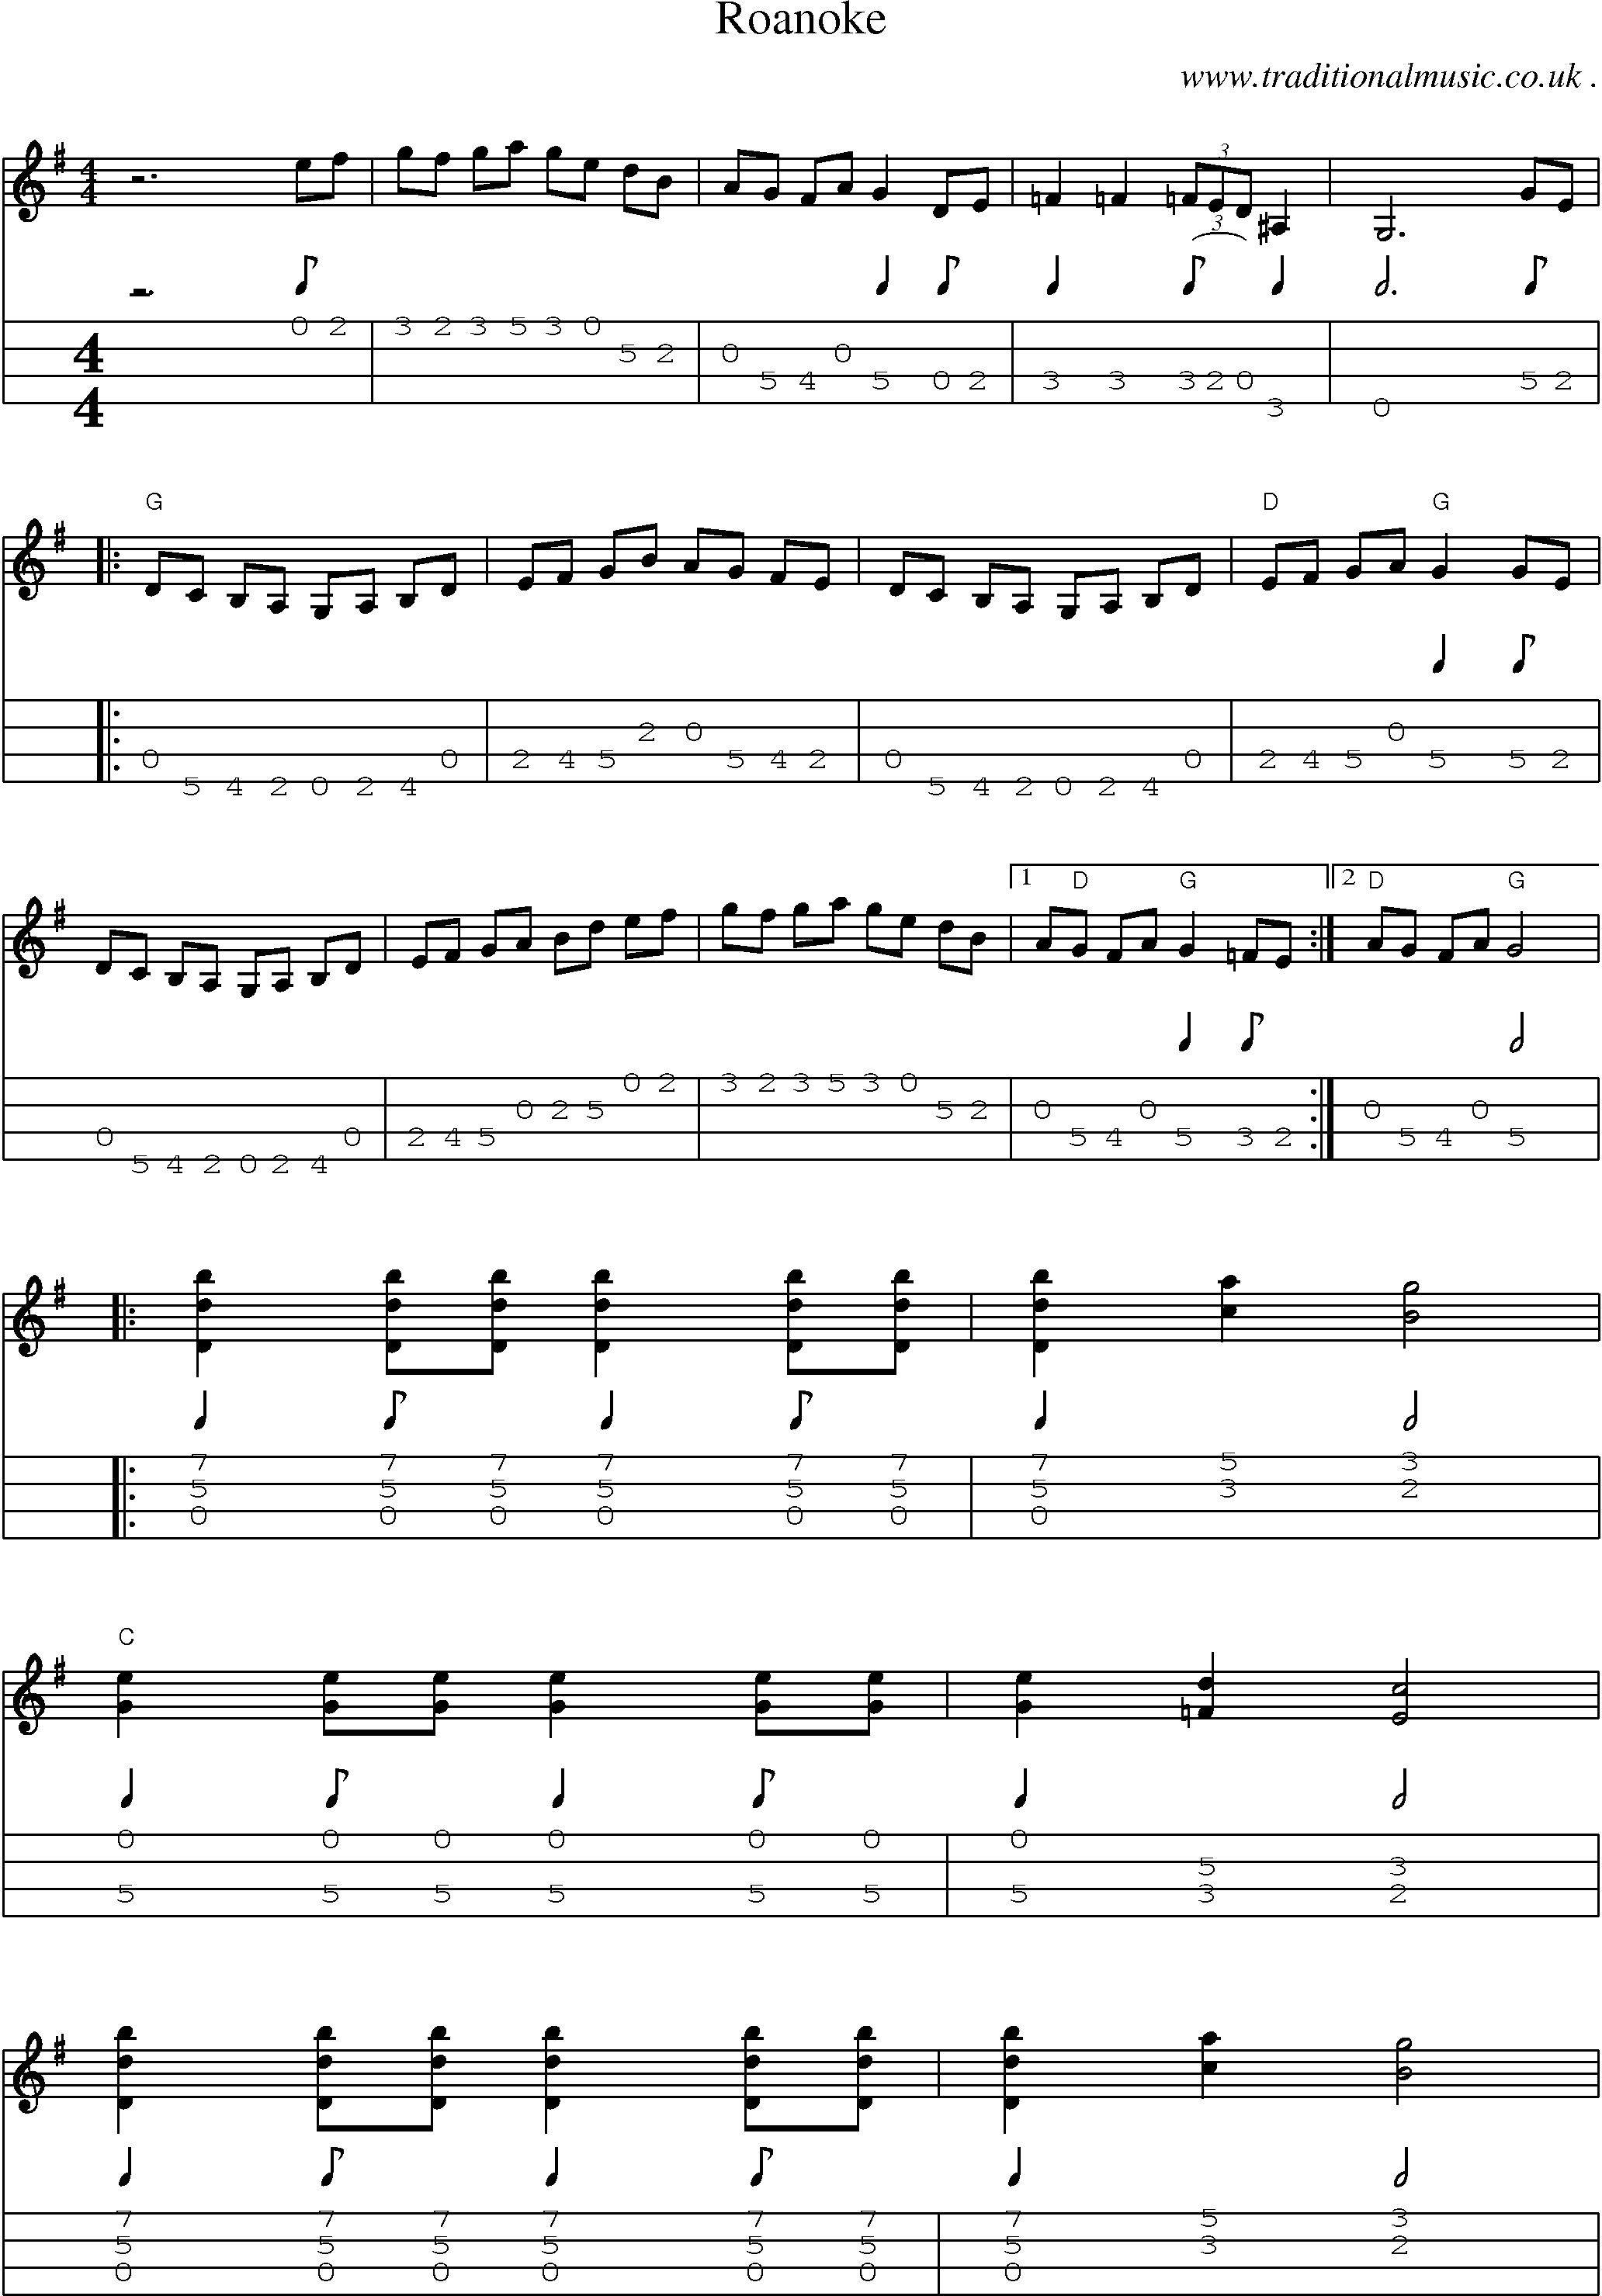 American Oldtime music, Scores and Tabs for Mandolin Roanoke